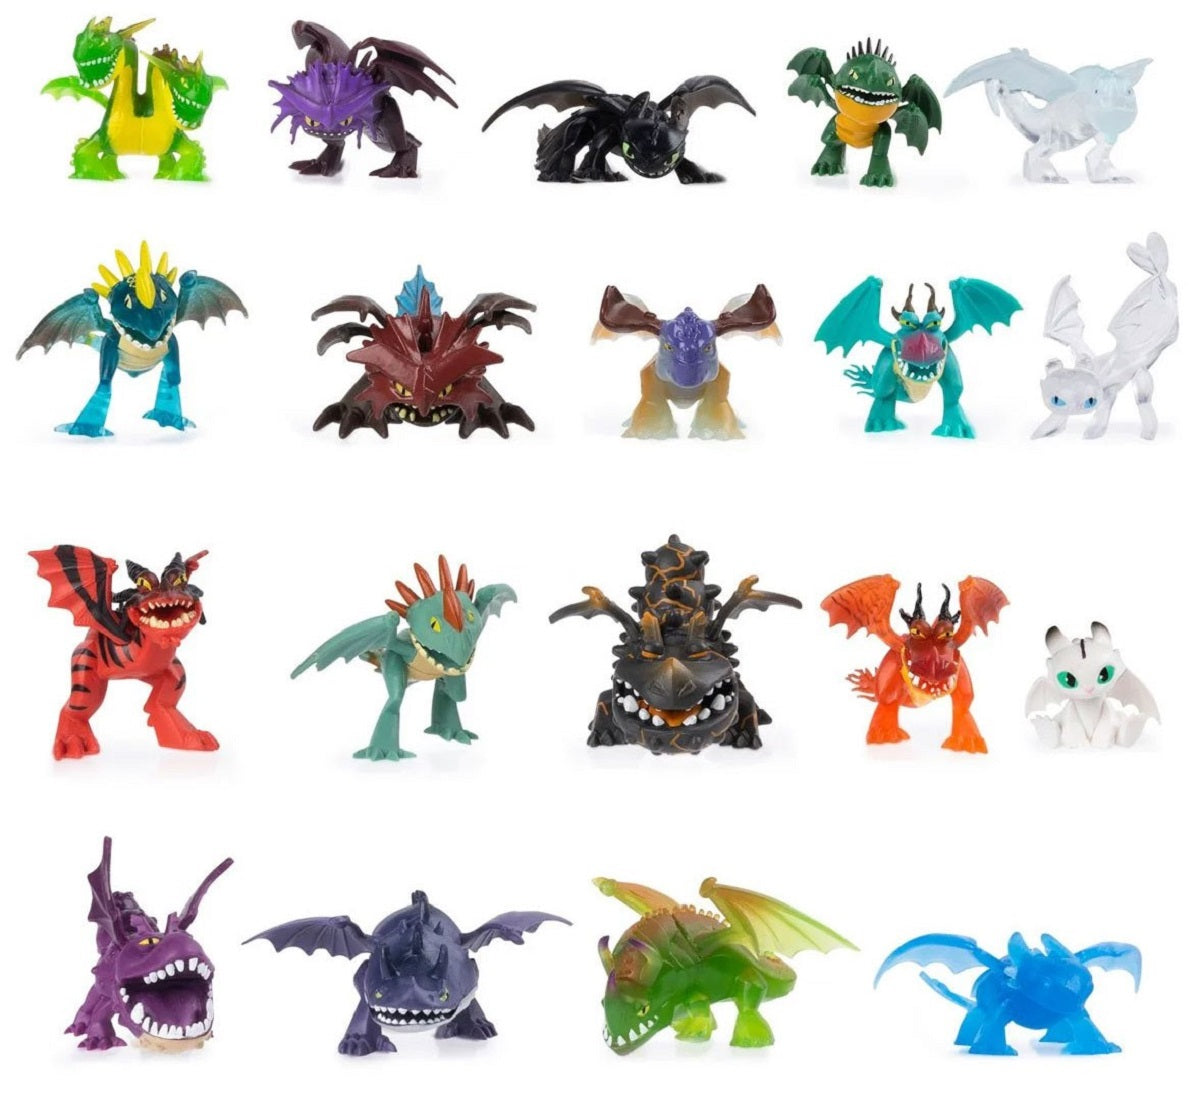 Mystery Dragons - Single Pack (Styles Vary)